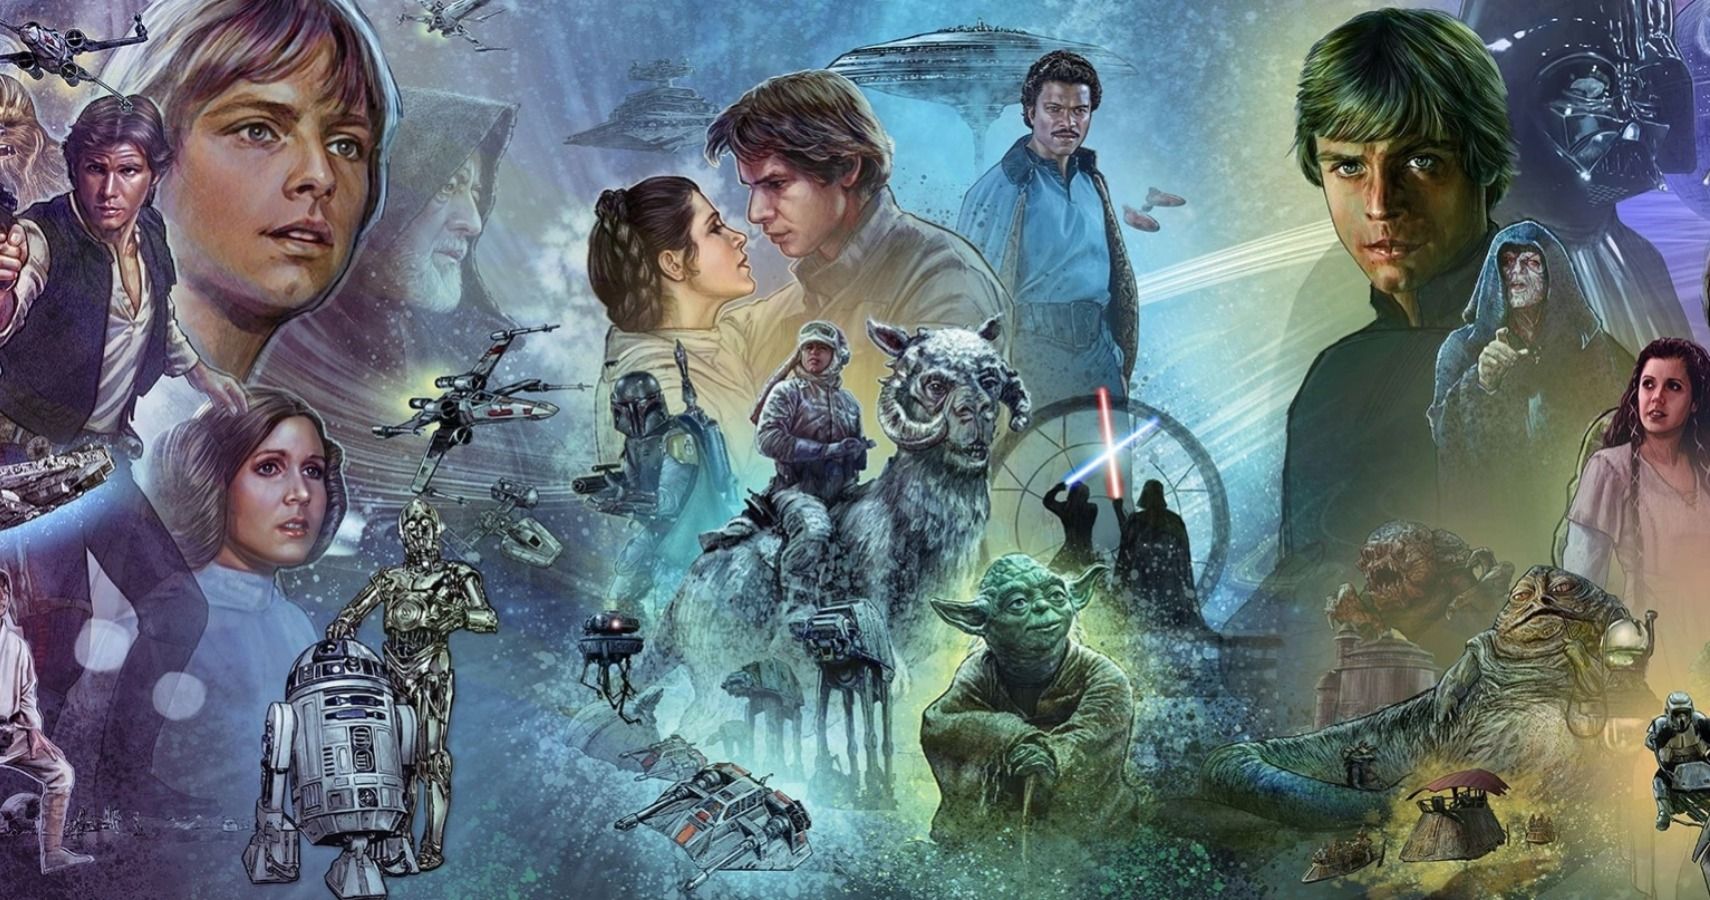 A Guide To Star Wars Myers-Briggs Types For Your Favorite Characters